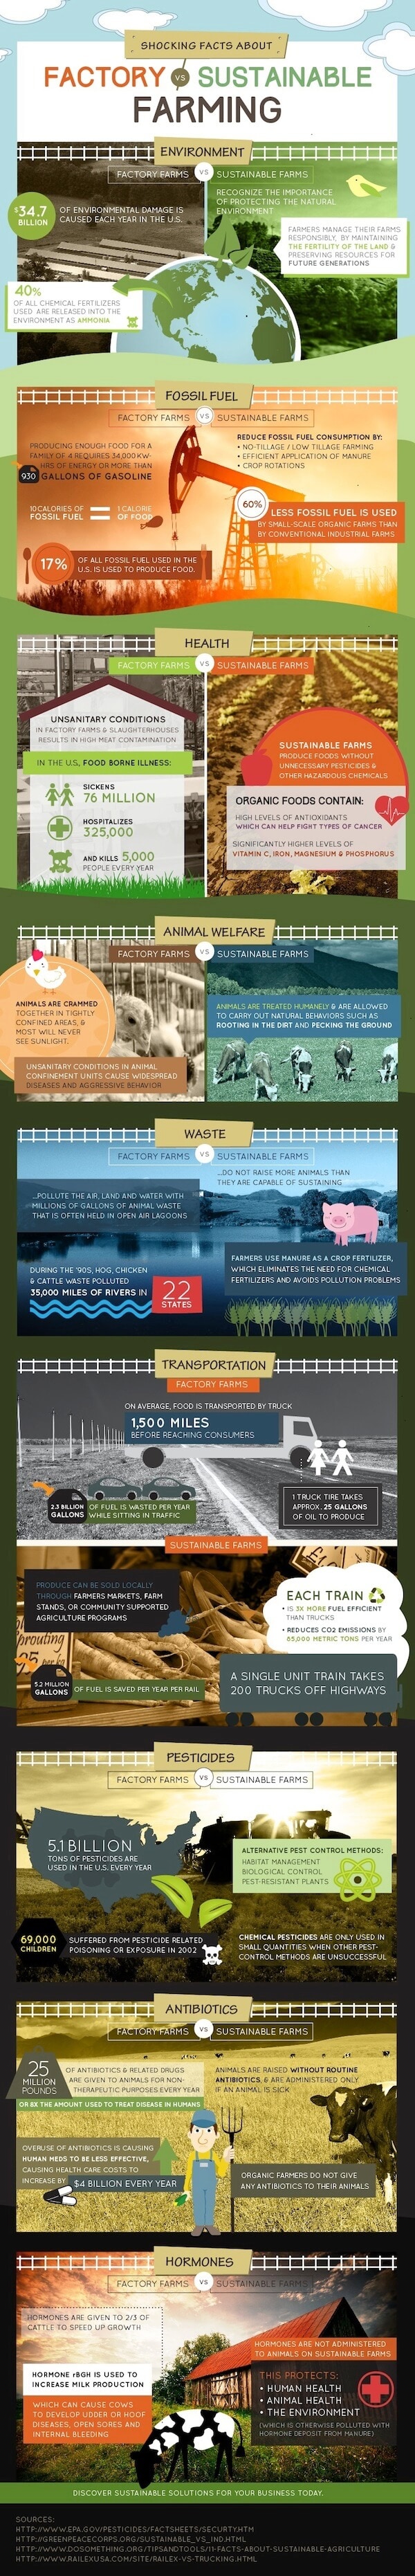 Factory farming infographic